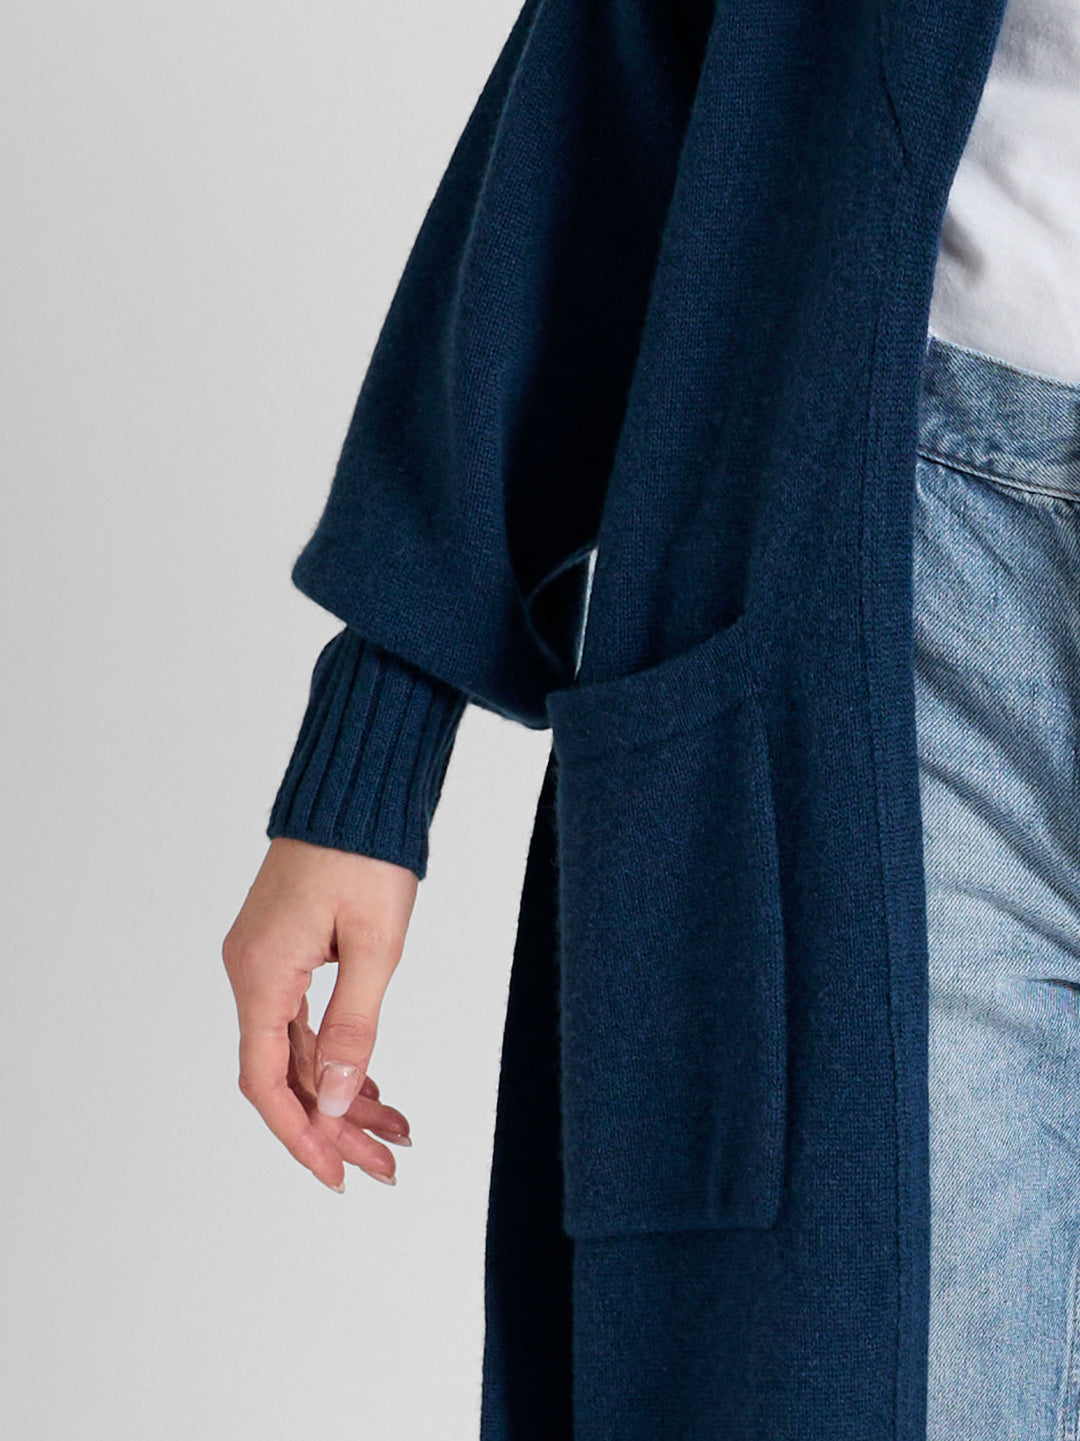 Cashmere coat "Trench" in 100% pure cashmere. Scandinavian design by Kashmina. Color: Mountain Blue.